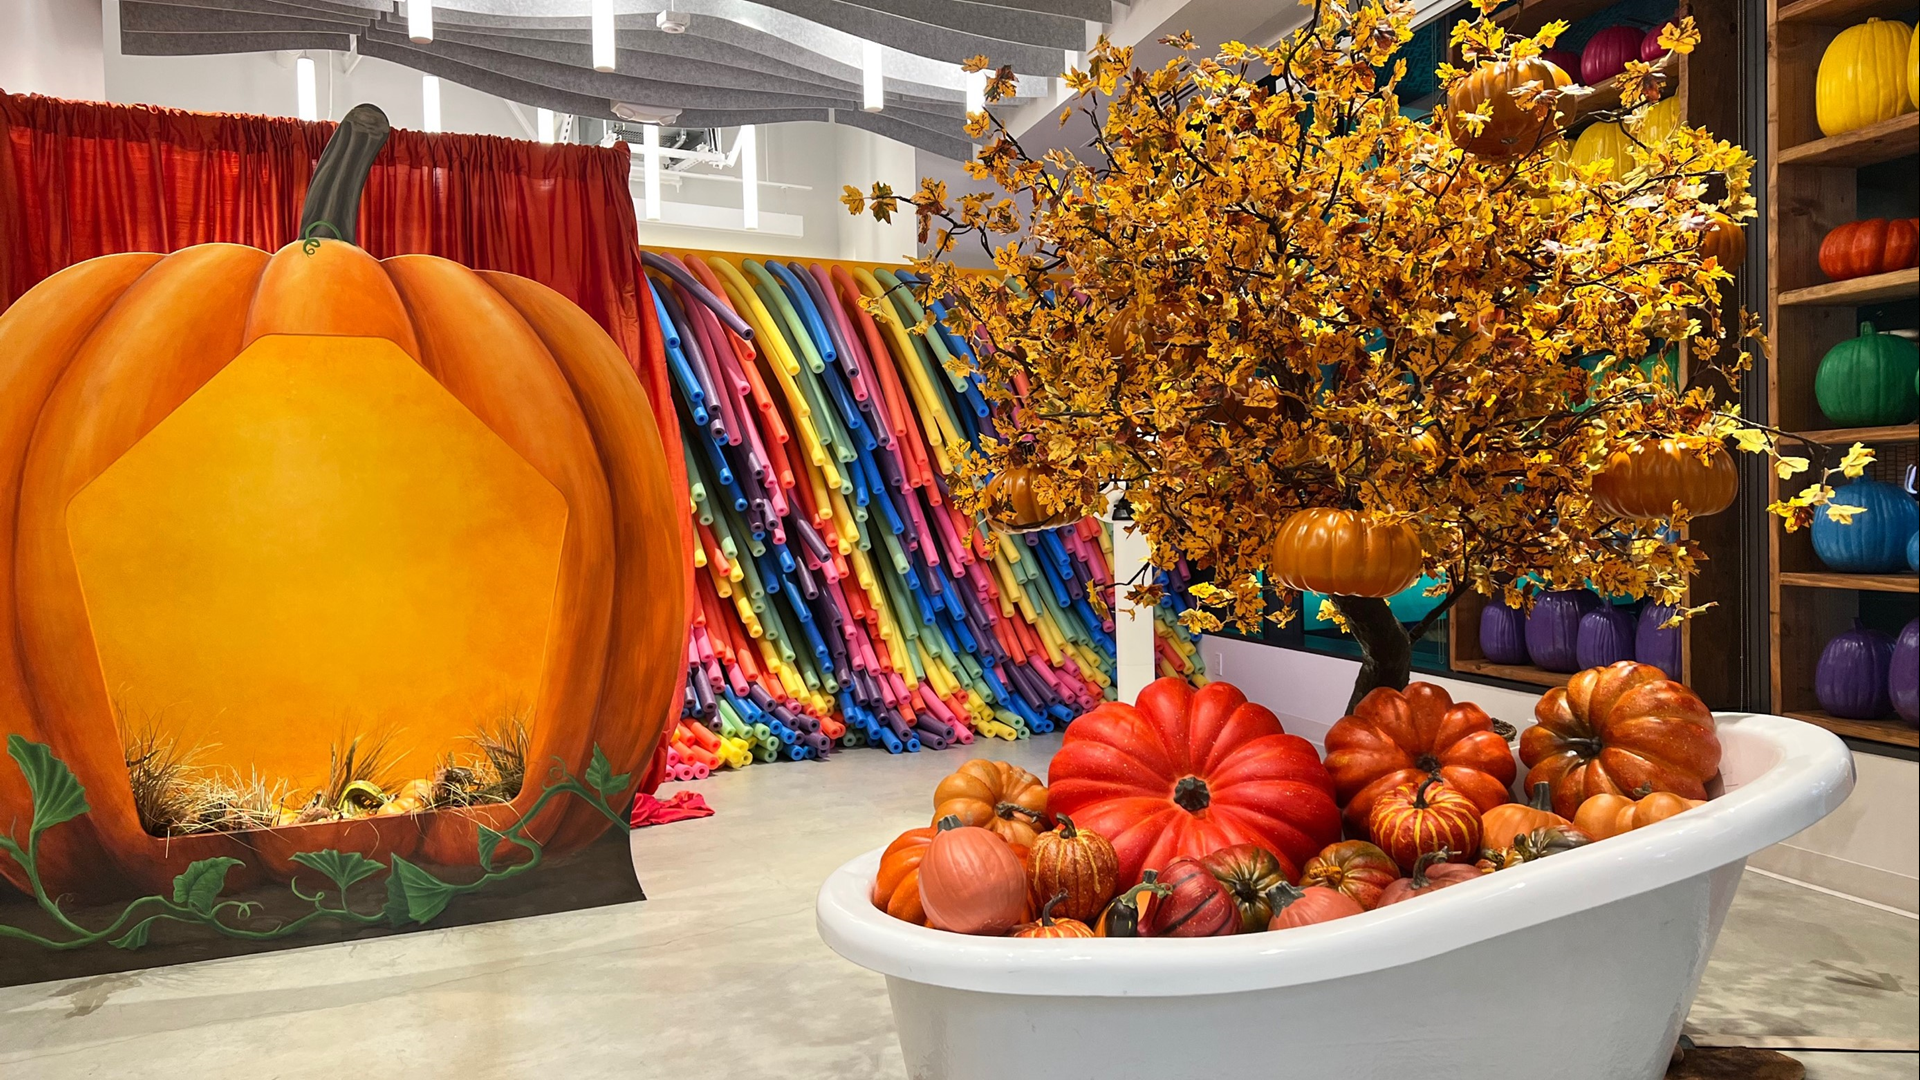 'ColorFall' awaits selfie-snapping guests. #k5evening